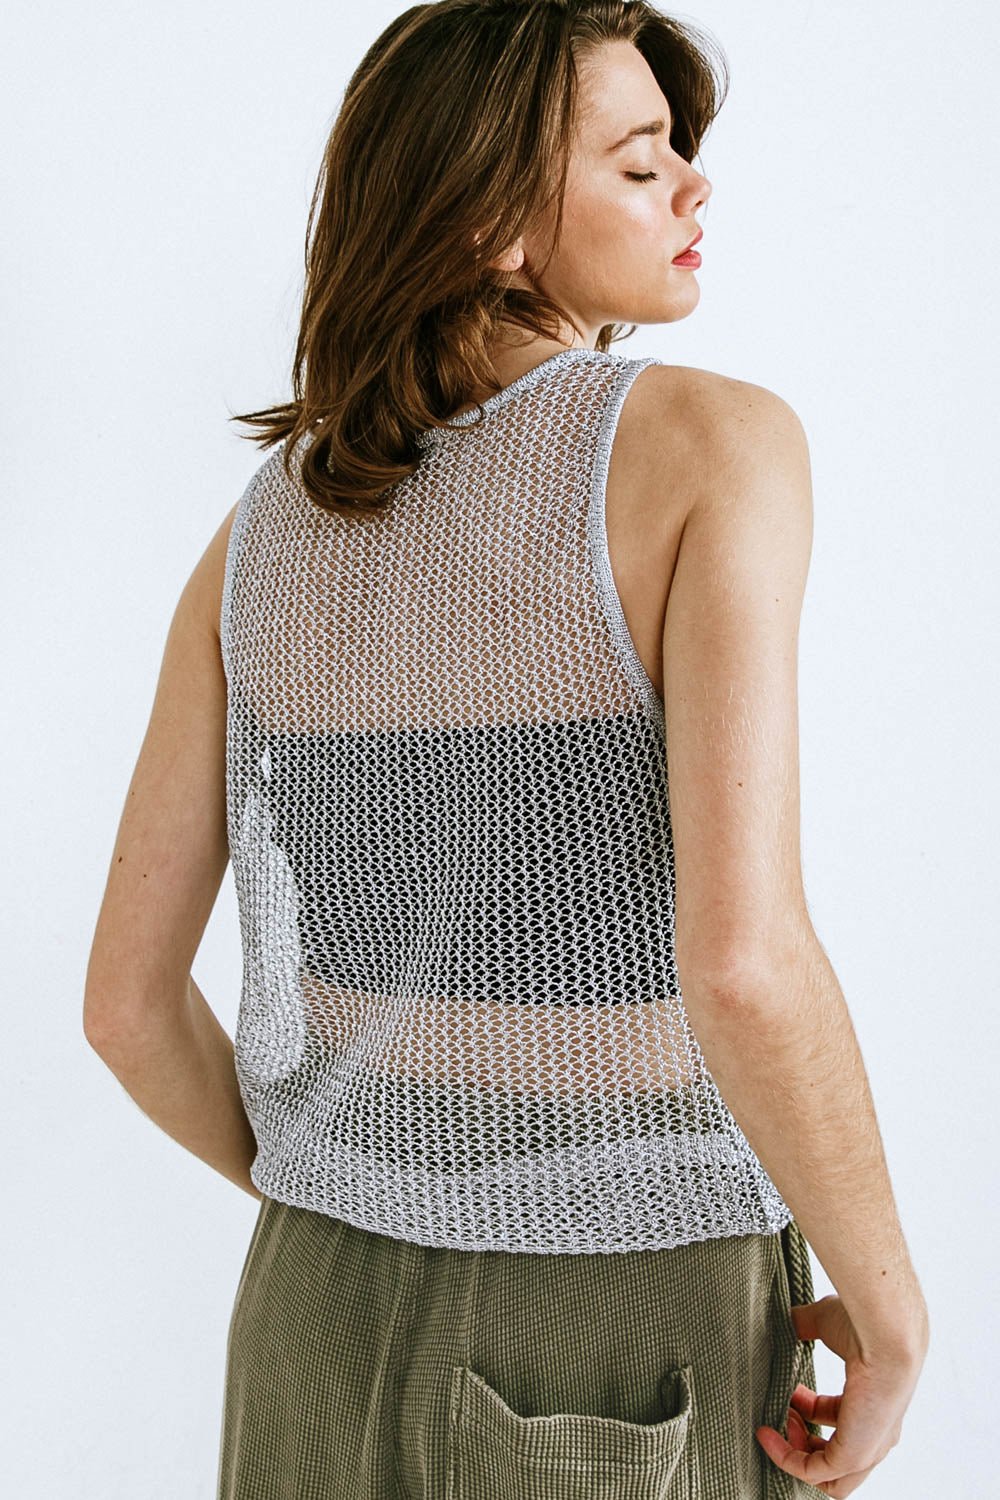 LOST IN THE WAVES WOVEN TANK TOP - Mack & Harvie